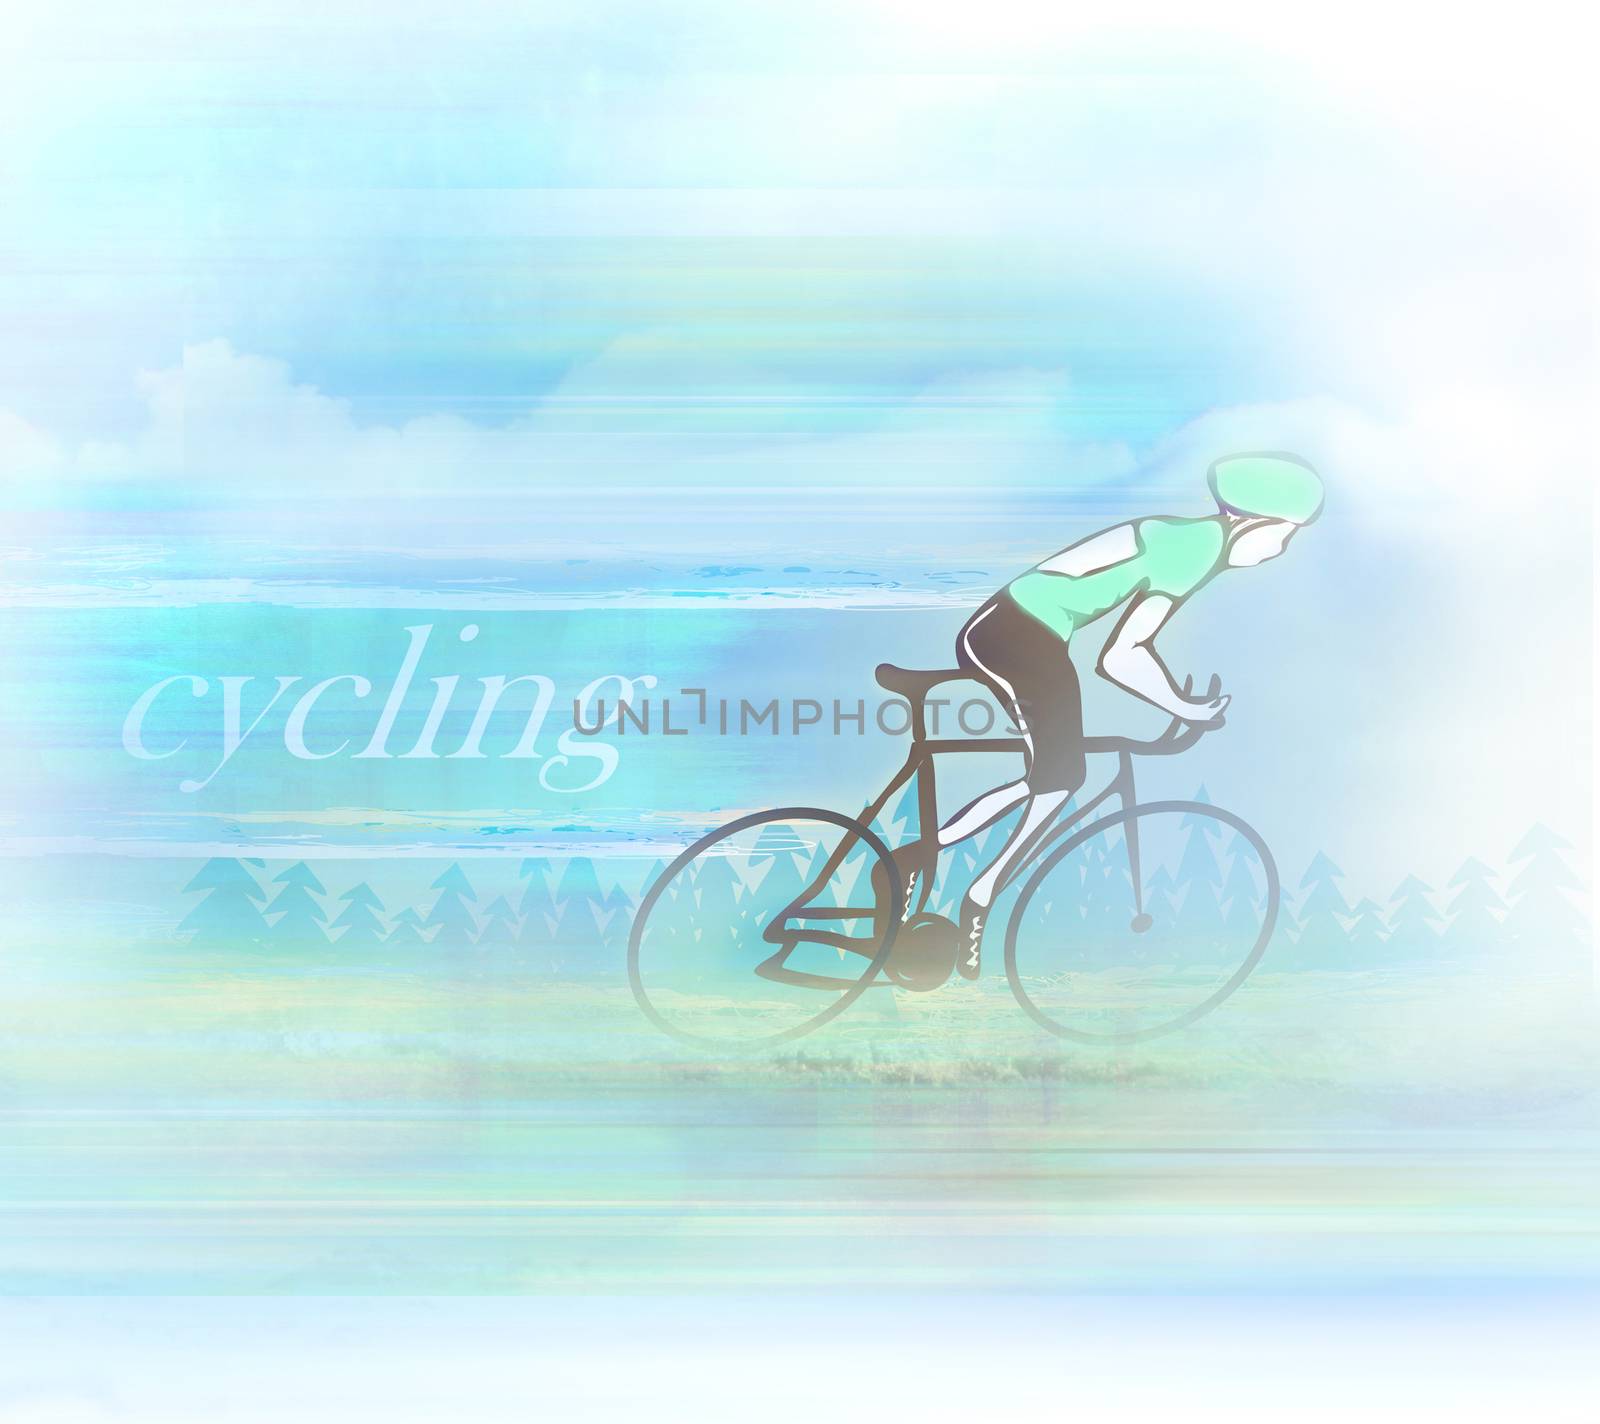 cycling race, abstract banner by JackyBrown